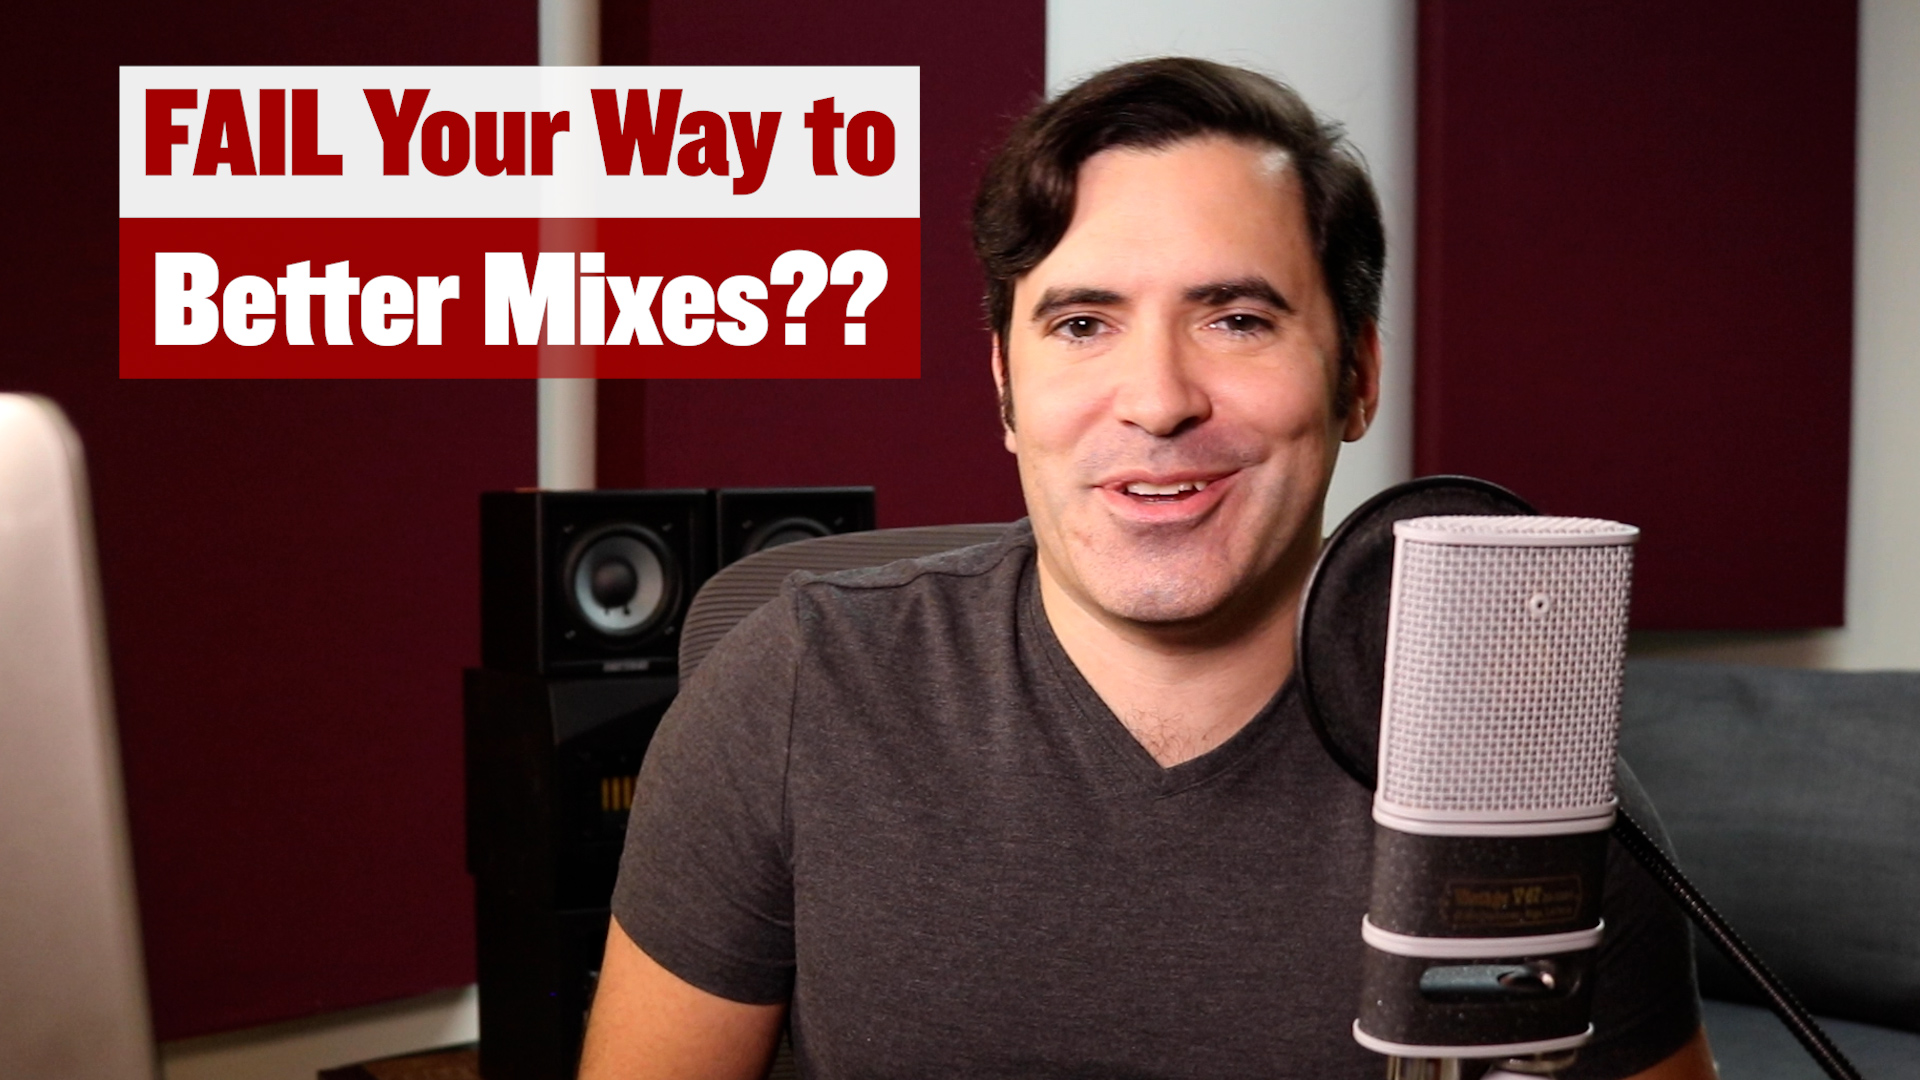 How to Fail Your Way to Better Mixes